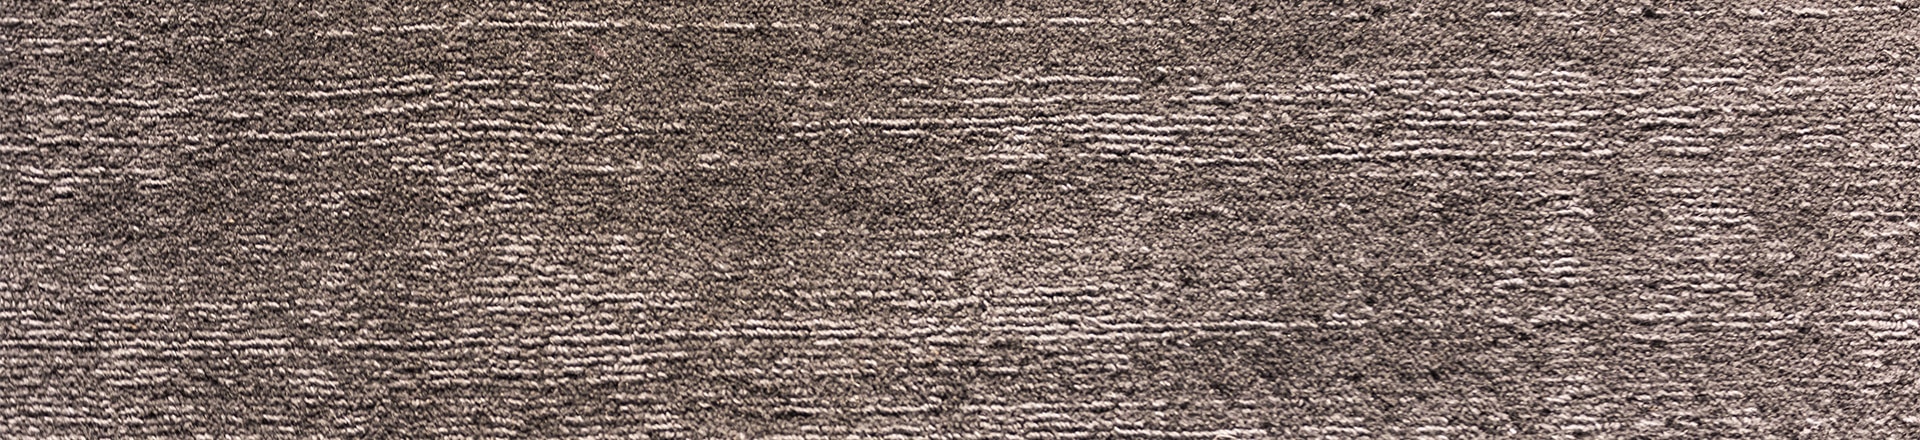 11What Are the 3 Common Causes of Carpet Buckling